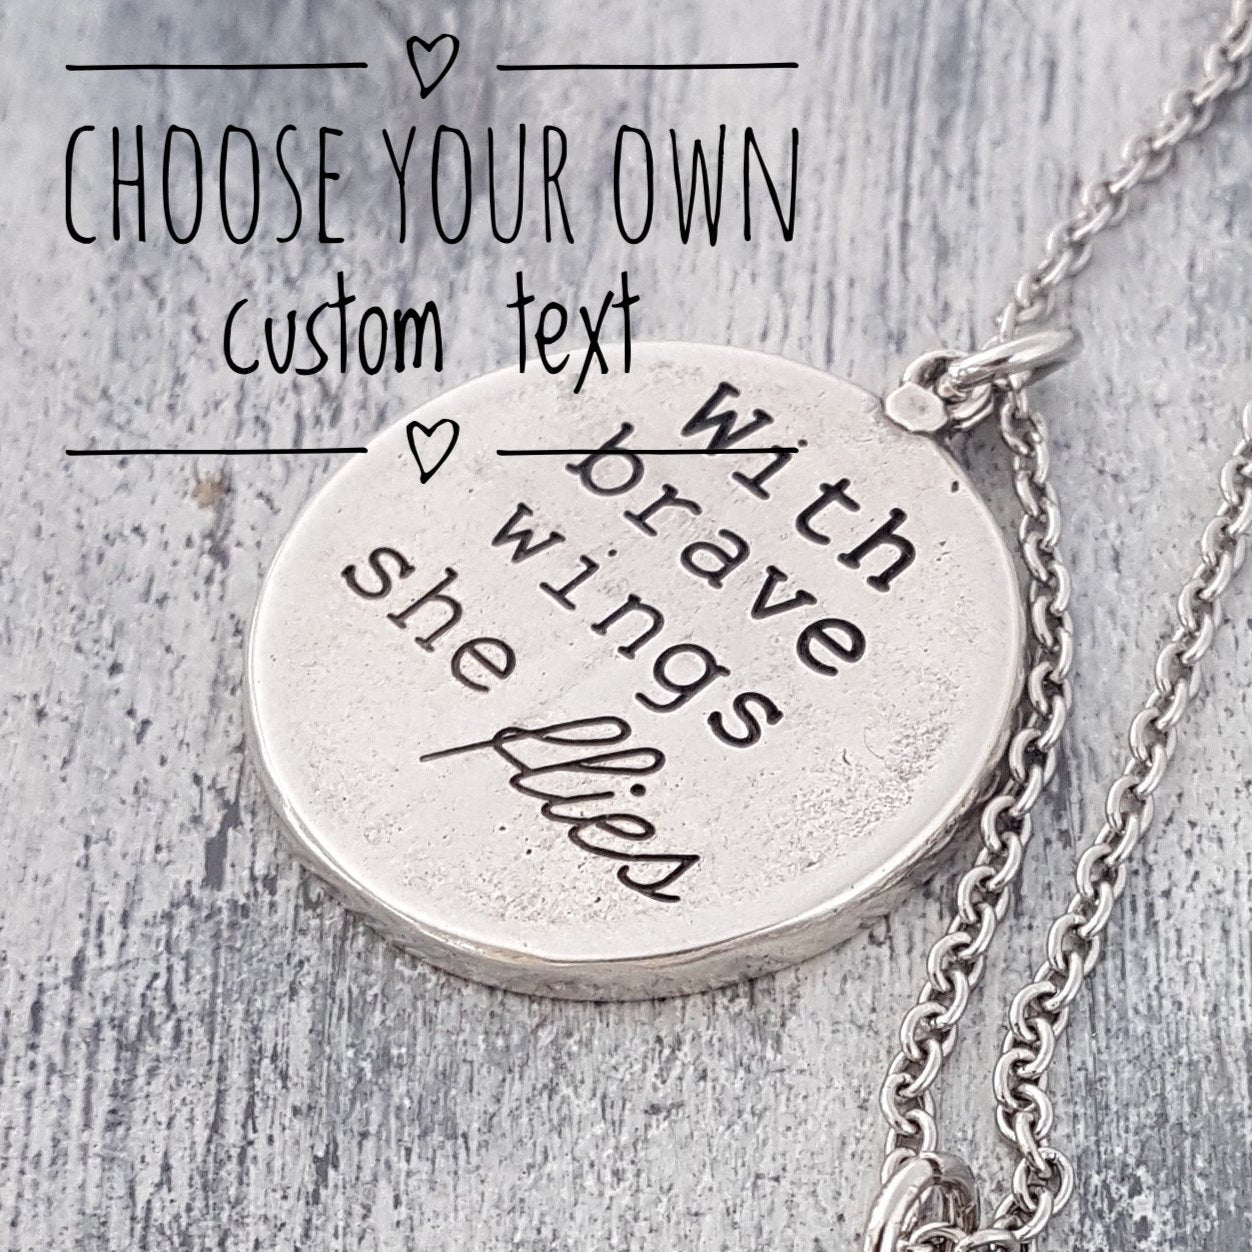 Personalized Necklace Custom Engraved Pendant - Name Necklace - Personalised Gift - Engraved Gift - Gift for Mom - Back to School Necklace - Gwen Delicious Jewelry Designs